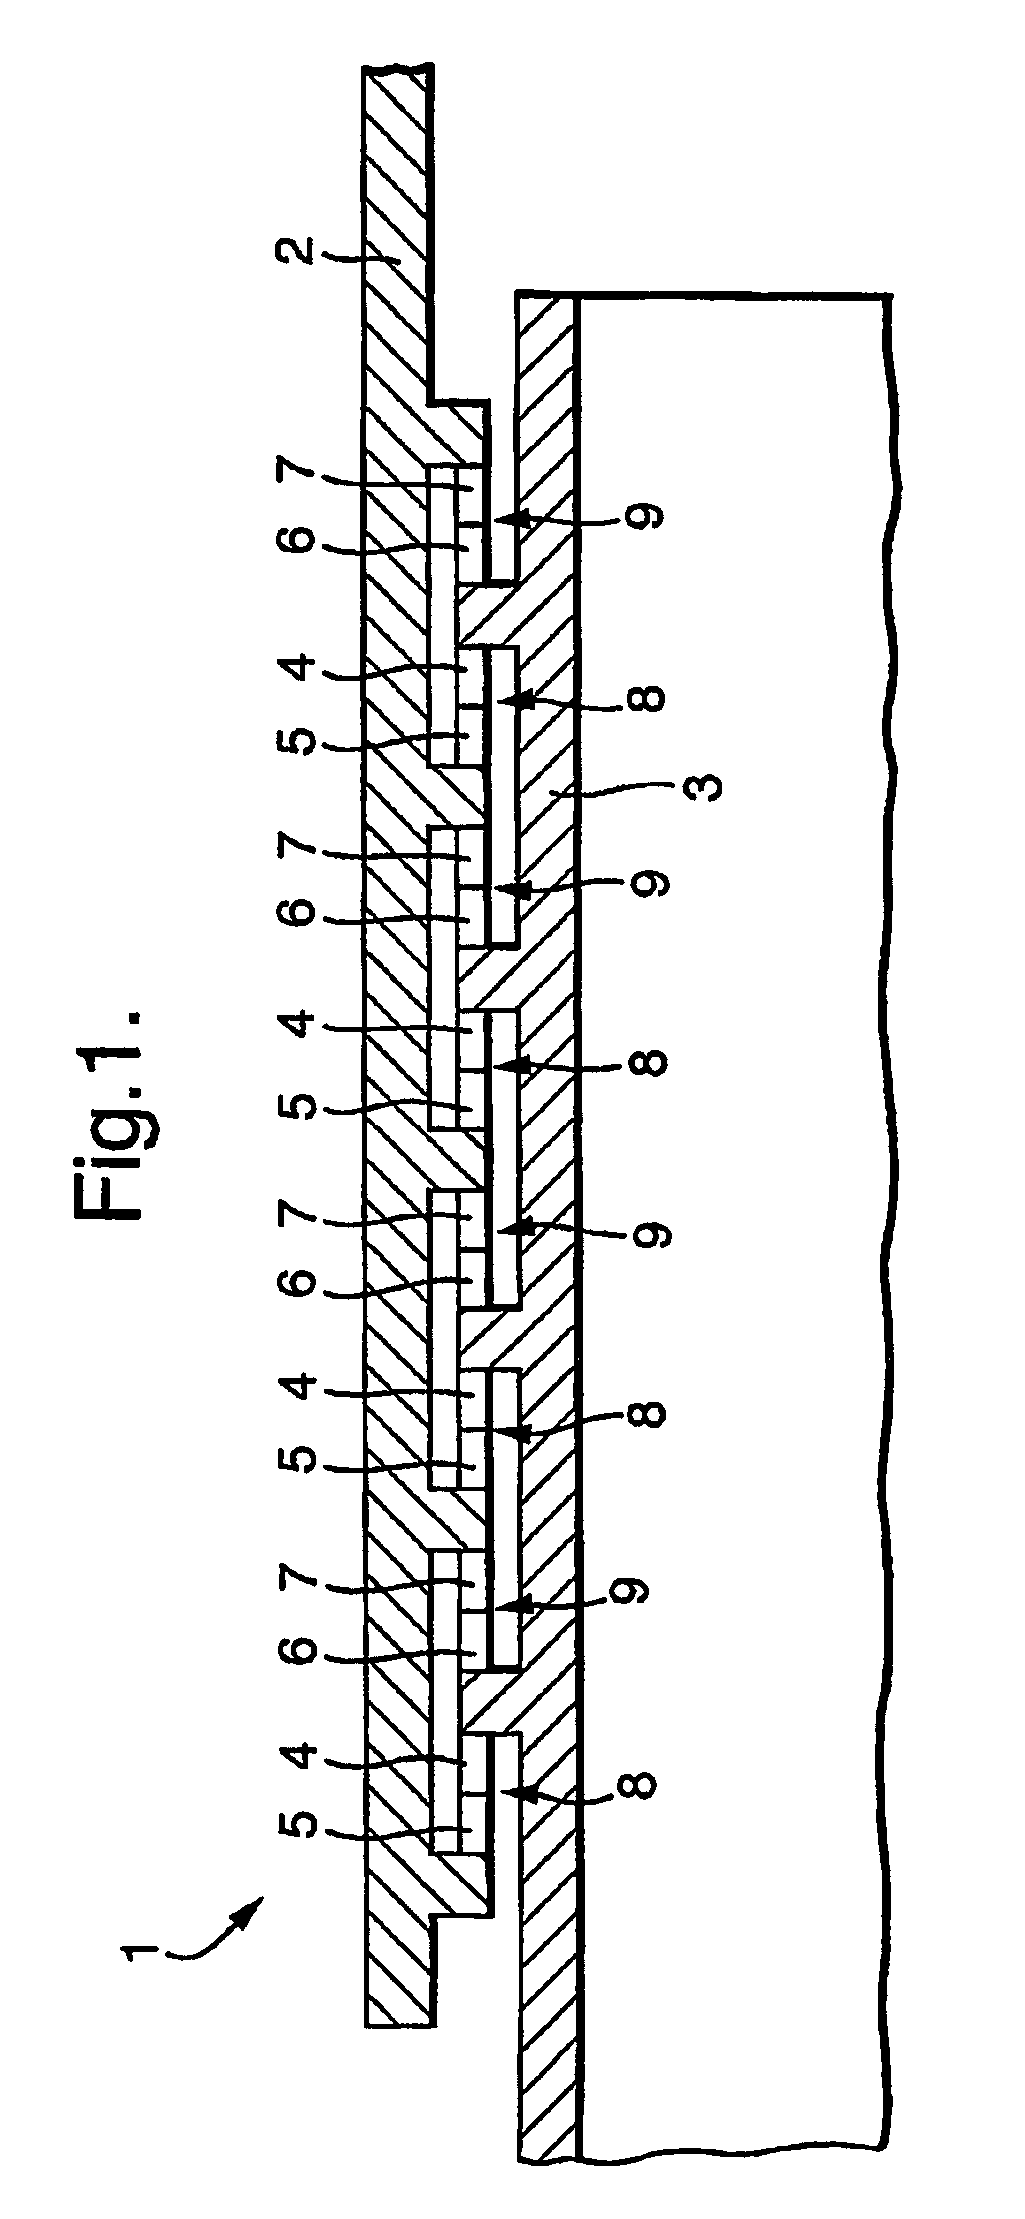 Bore hole tool assembly and method of designing same